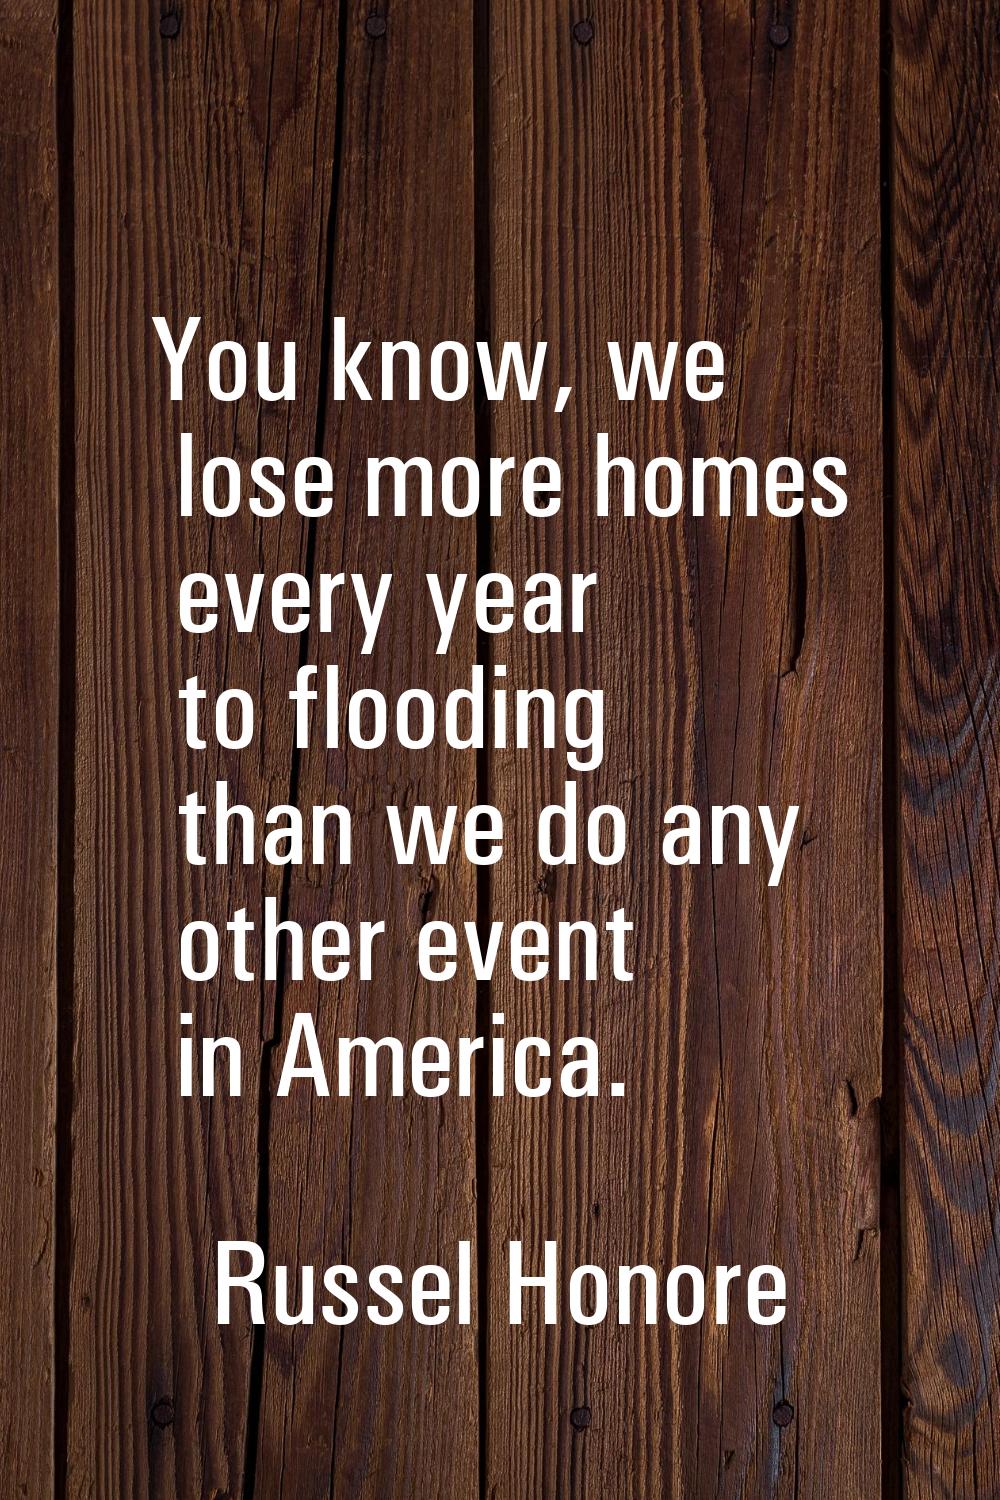 You know, we lose more homes every year to flooding than we do any other event in America.